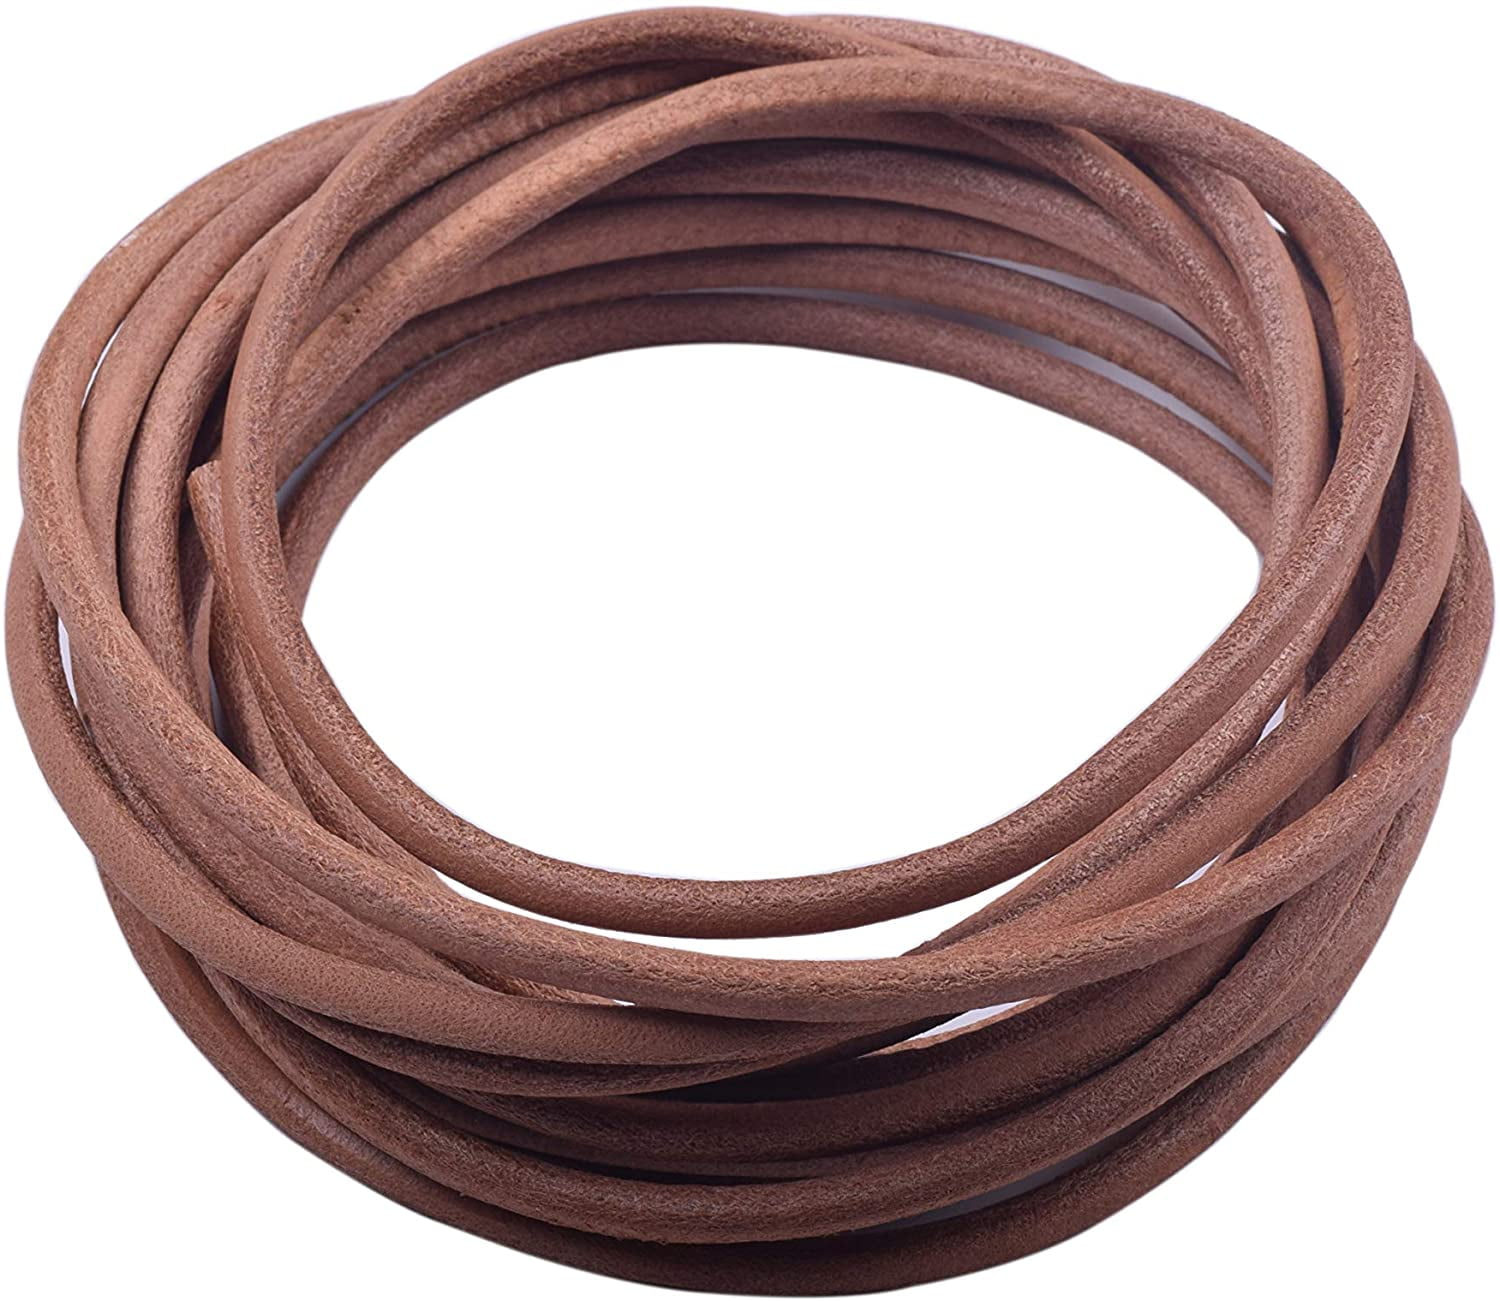 5.0mm Genuine Flat Leather Cords for Bracelet Neckacle Beading Jewelry Making 5meter Brown 